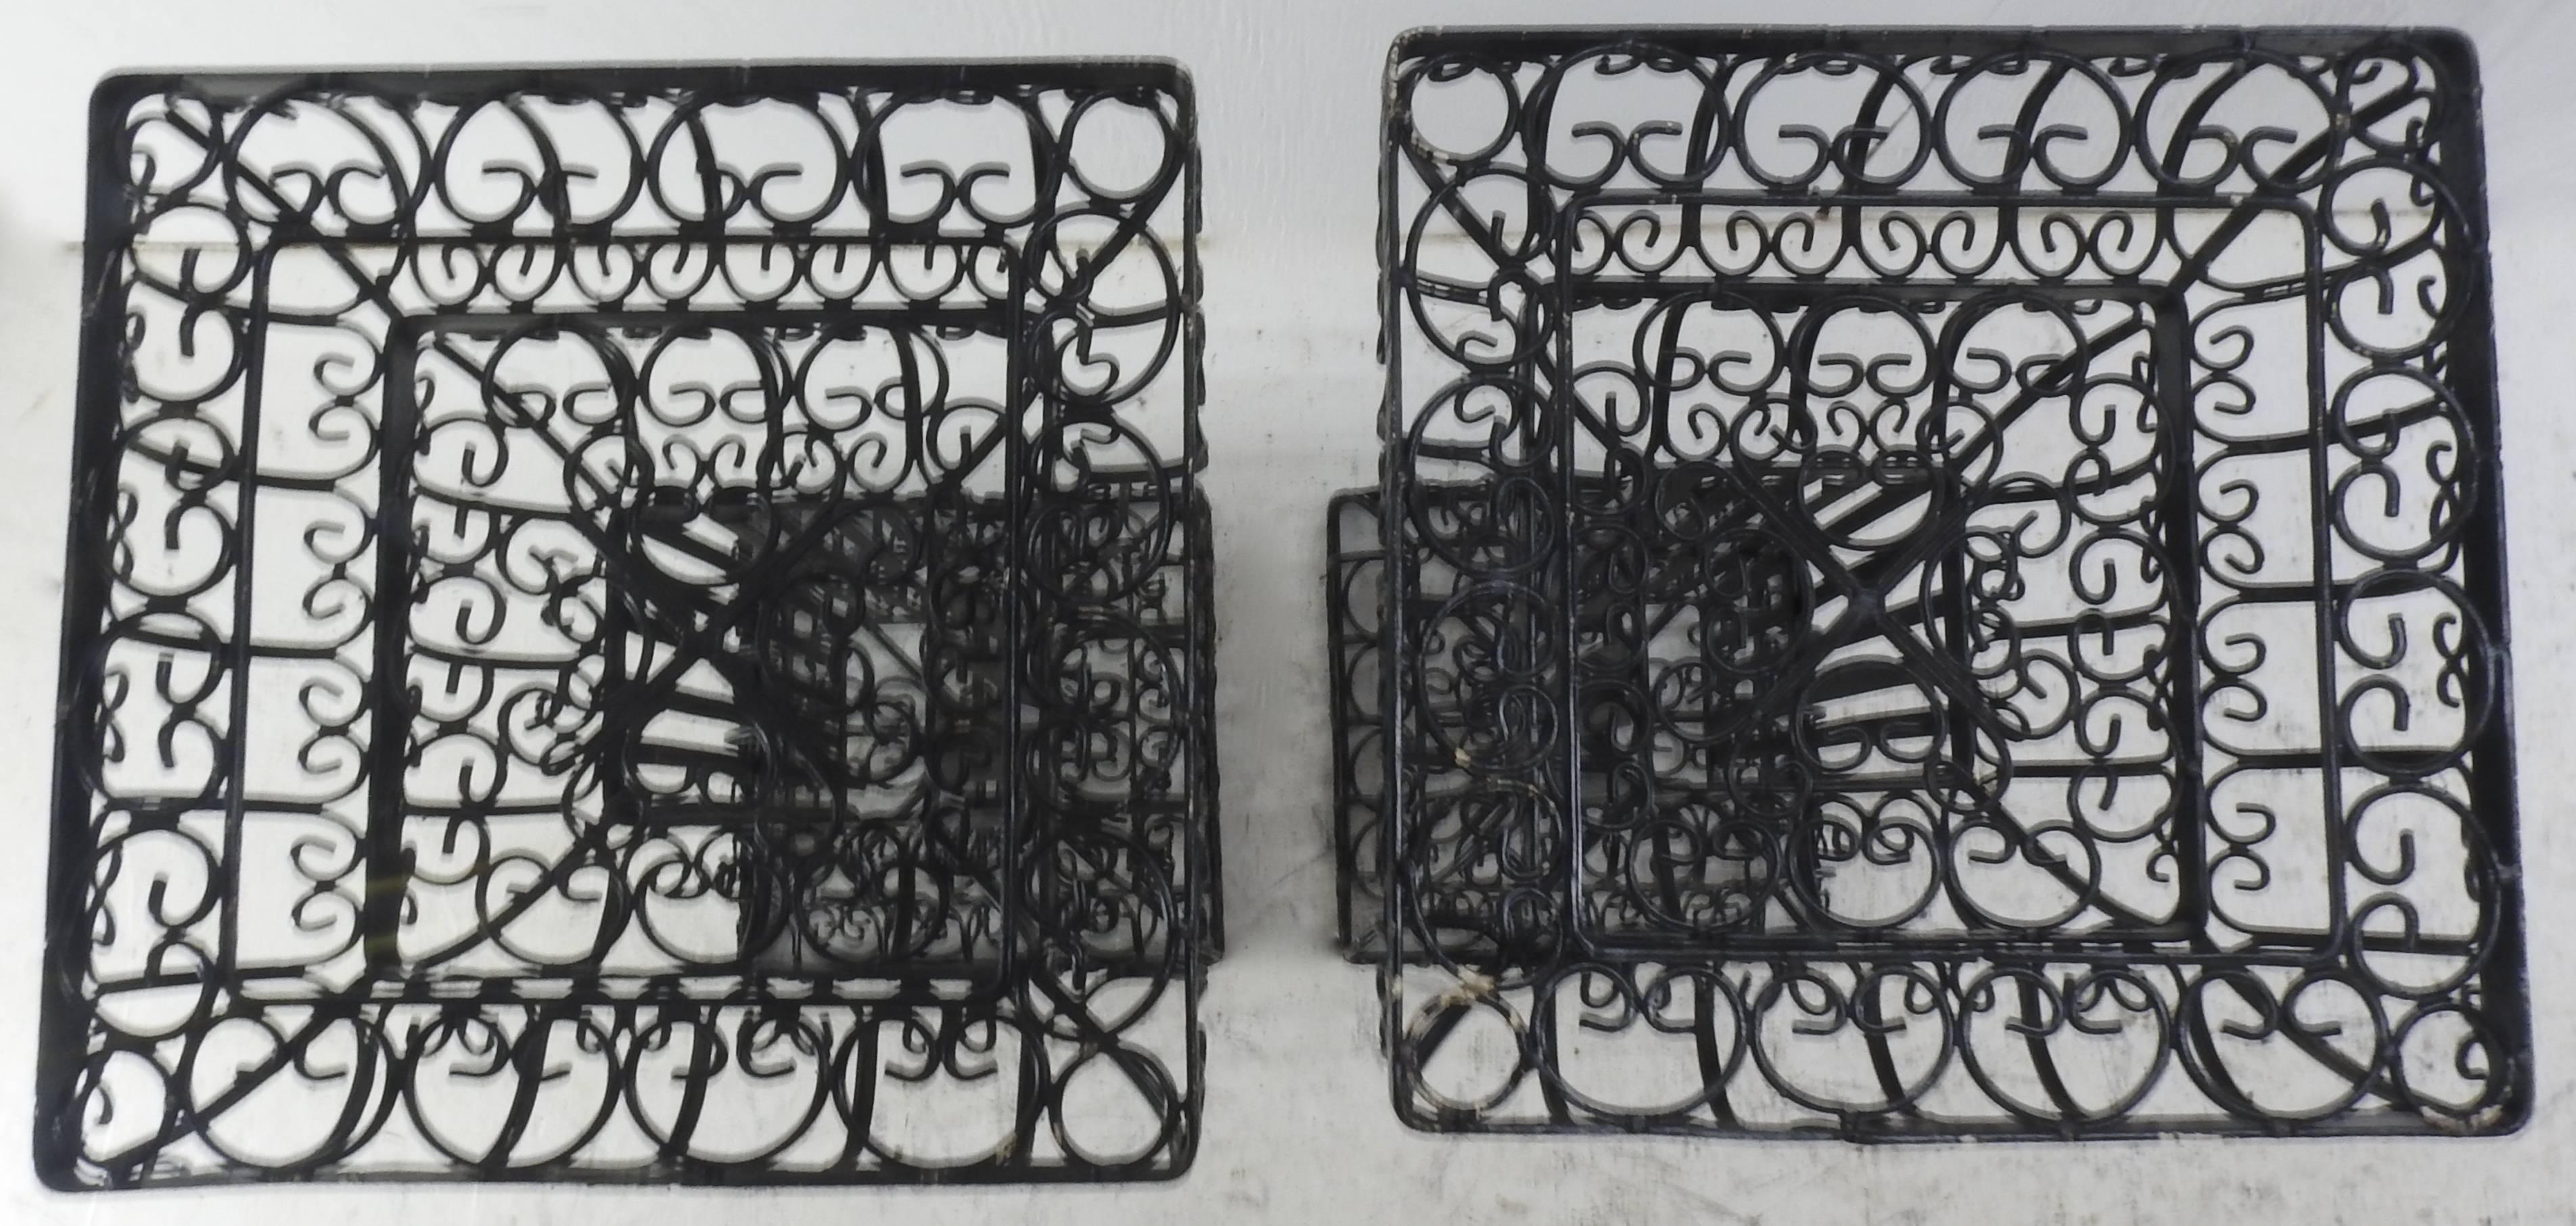 Featured is a pair of Victorian metal plant stands painted black. They feature swirls of metal to form the ornate details on the stands.